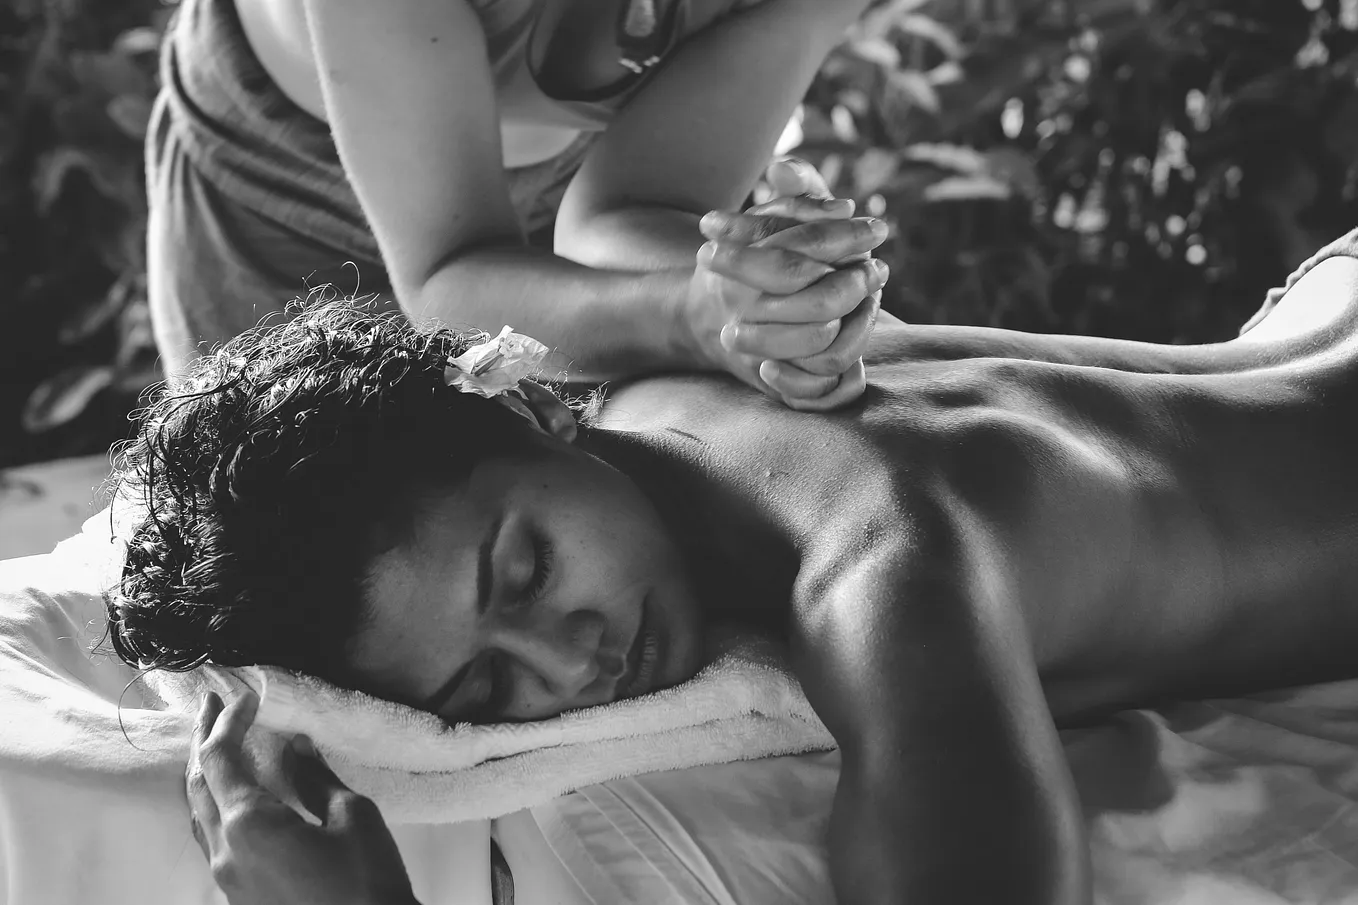 A woman lies on a bed being given a massage, her eyes closed, a flower behind her ear. The scene is one of tropical luxury